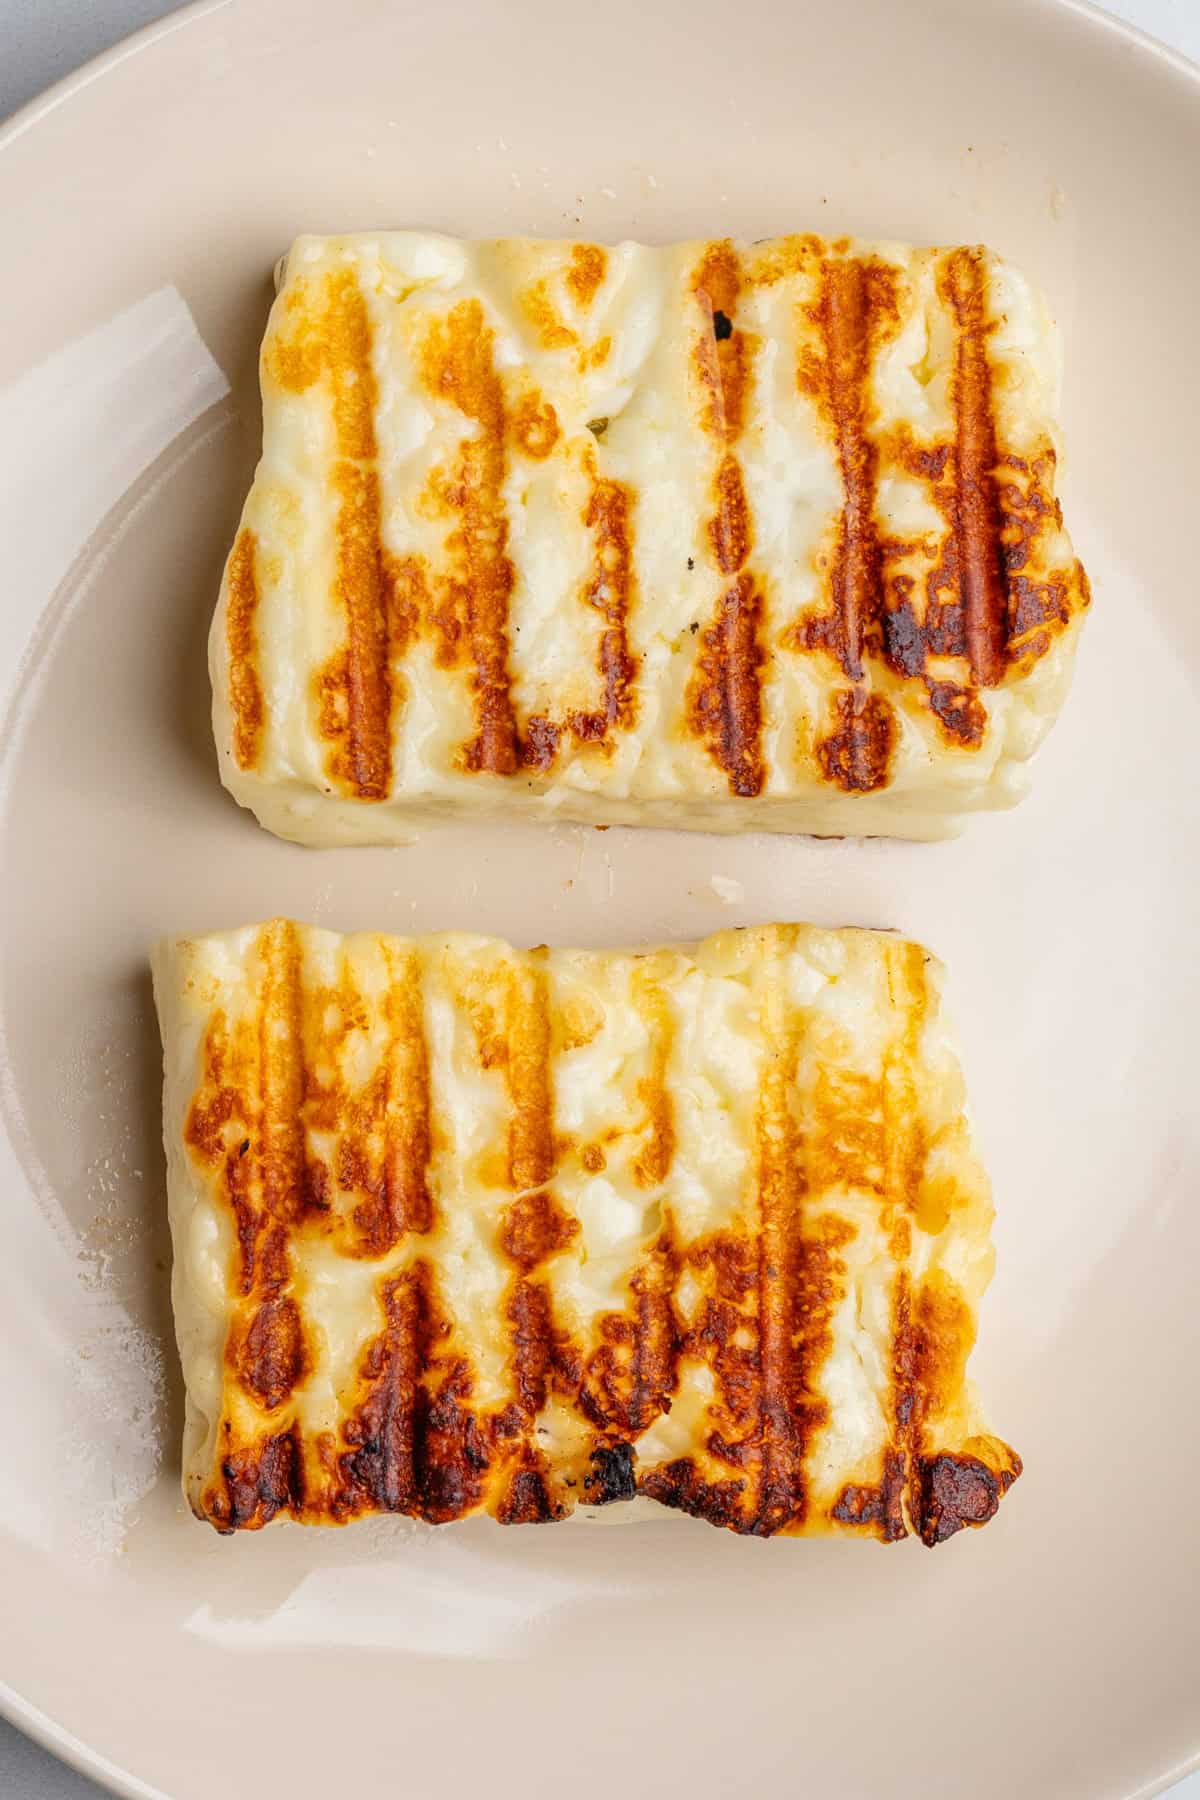 Two pieces of halloumi grilled